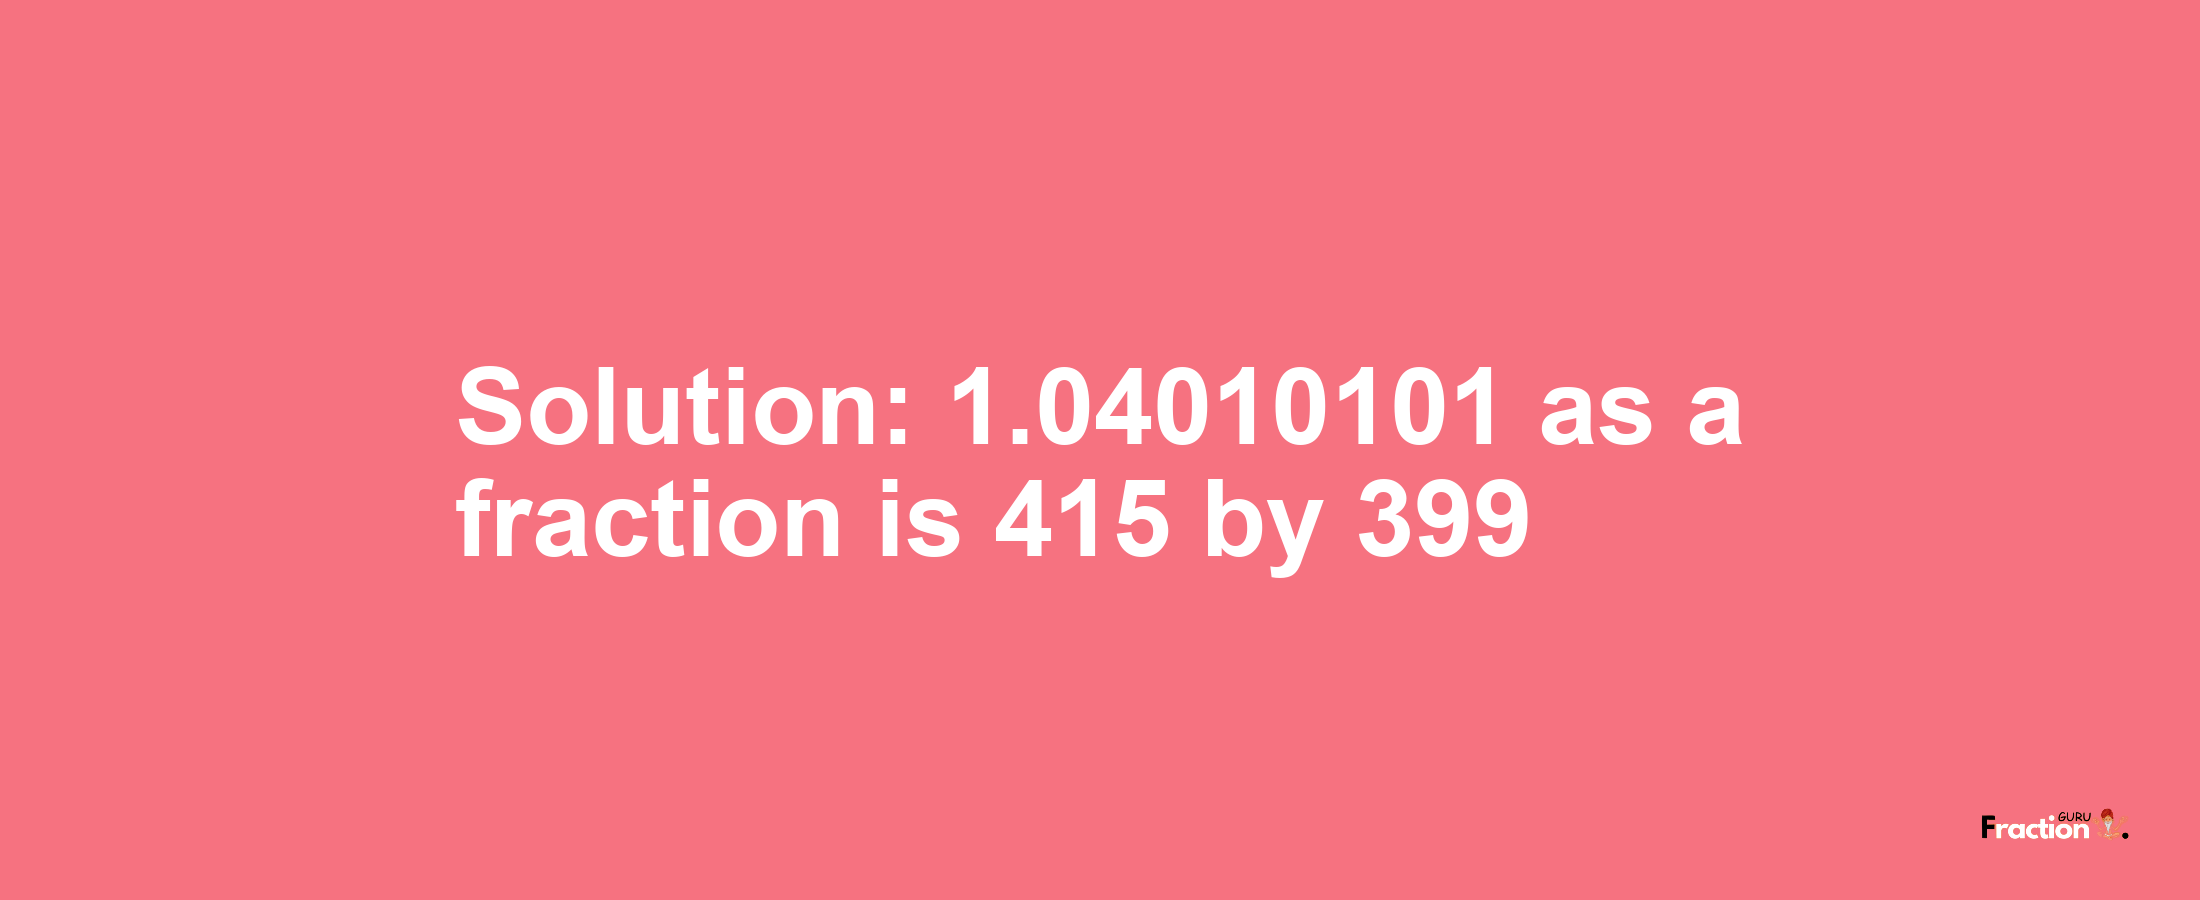 Solution:1.04010101 as a fraction is 415/399